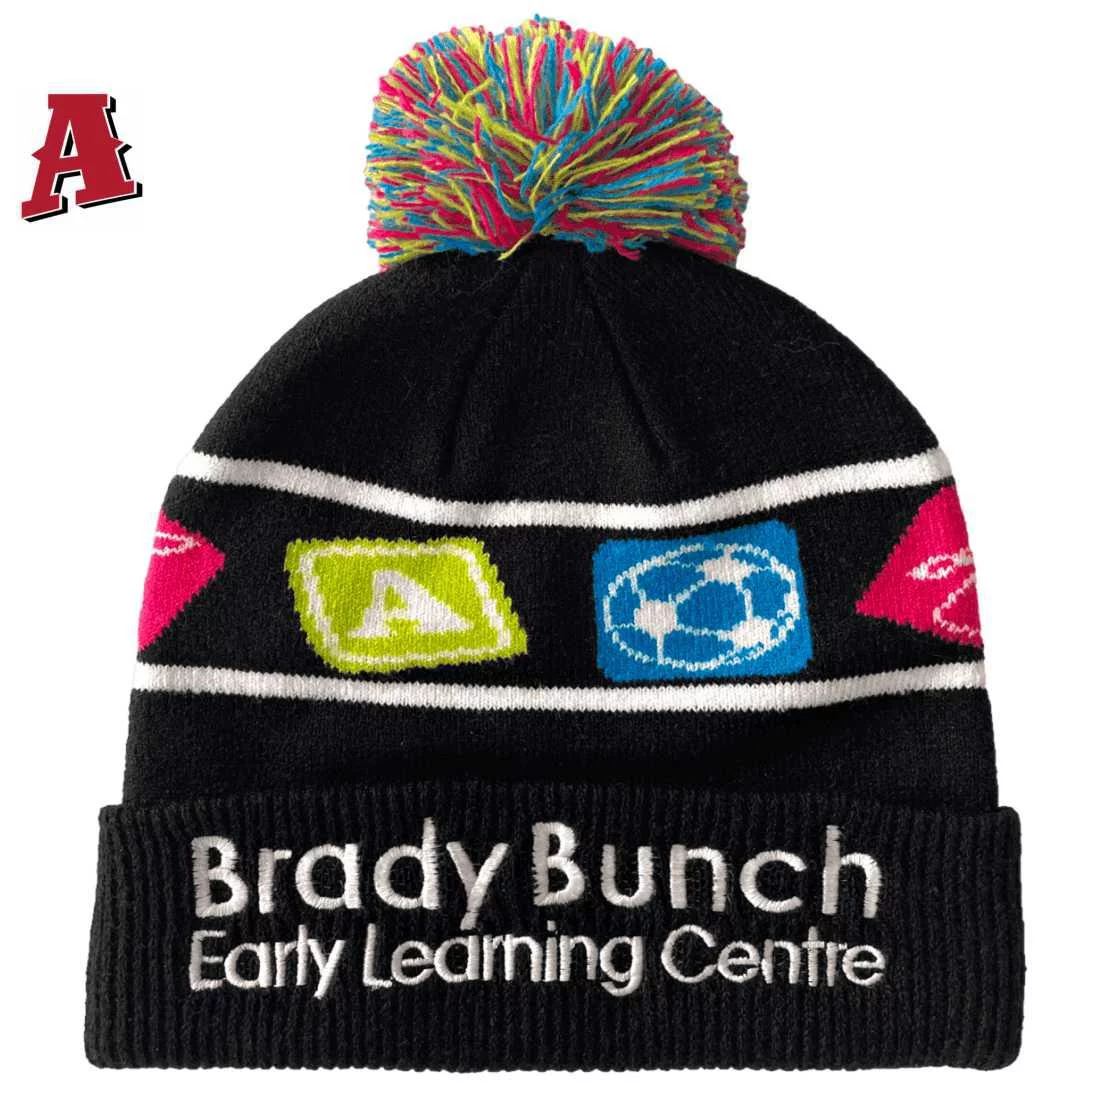 Brady Bunch Early Learning Centre Burpengary Qld Aussie Acrylic Beanie Childs Size with Pom Pom Black White